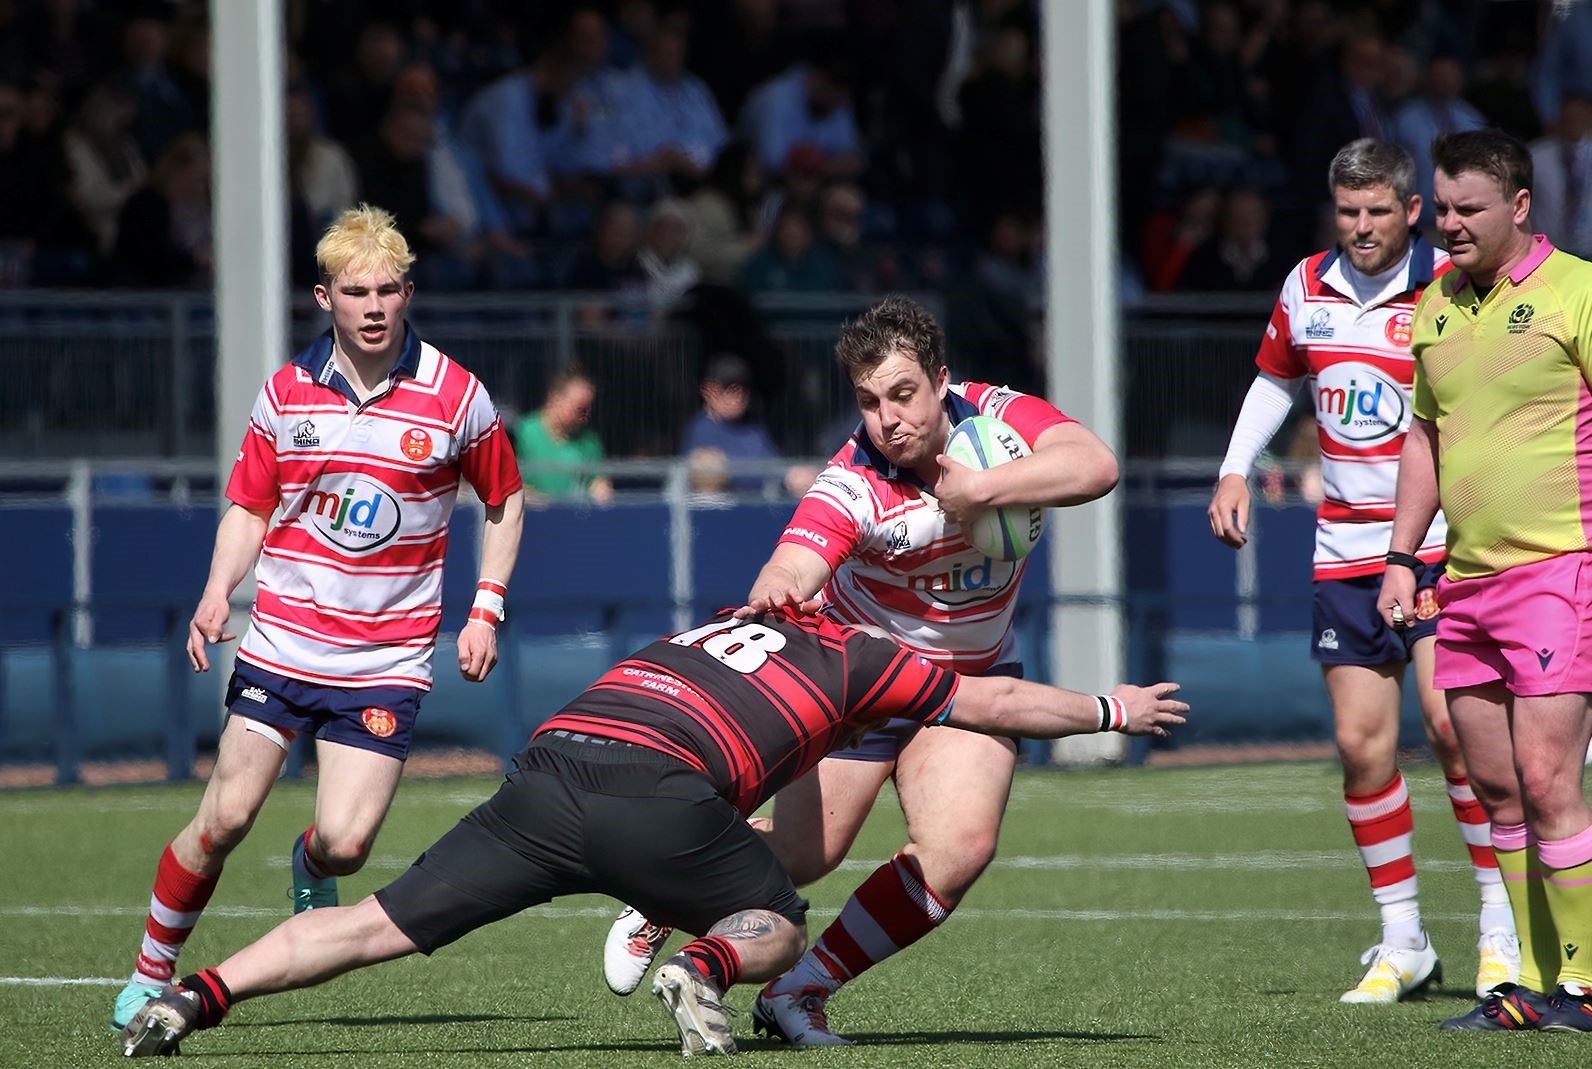 Cameron Hughes tries to break tackle, backed up by Lewis Hay and David Clarke. Picture: John MacGregor